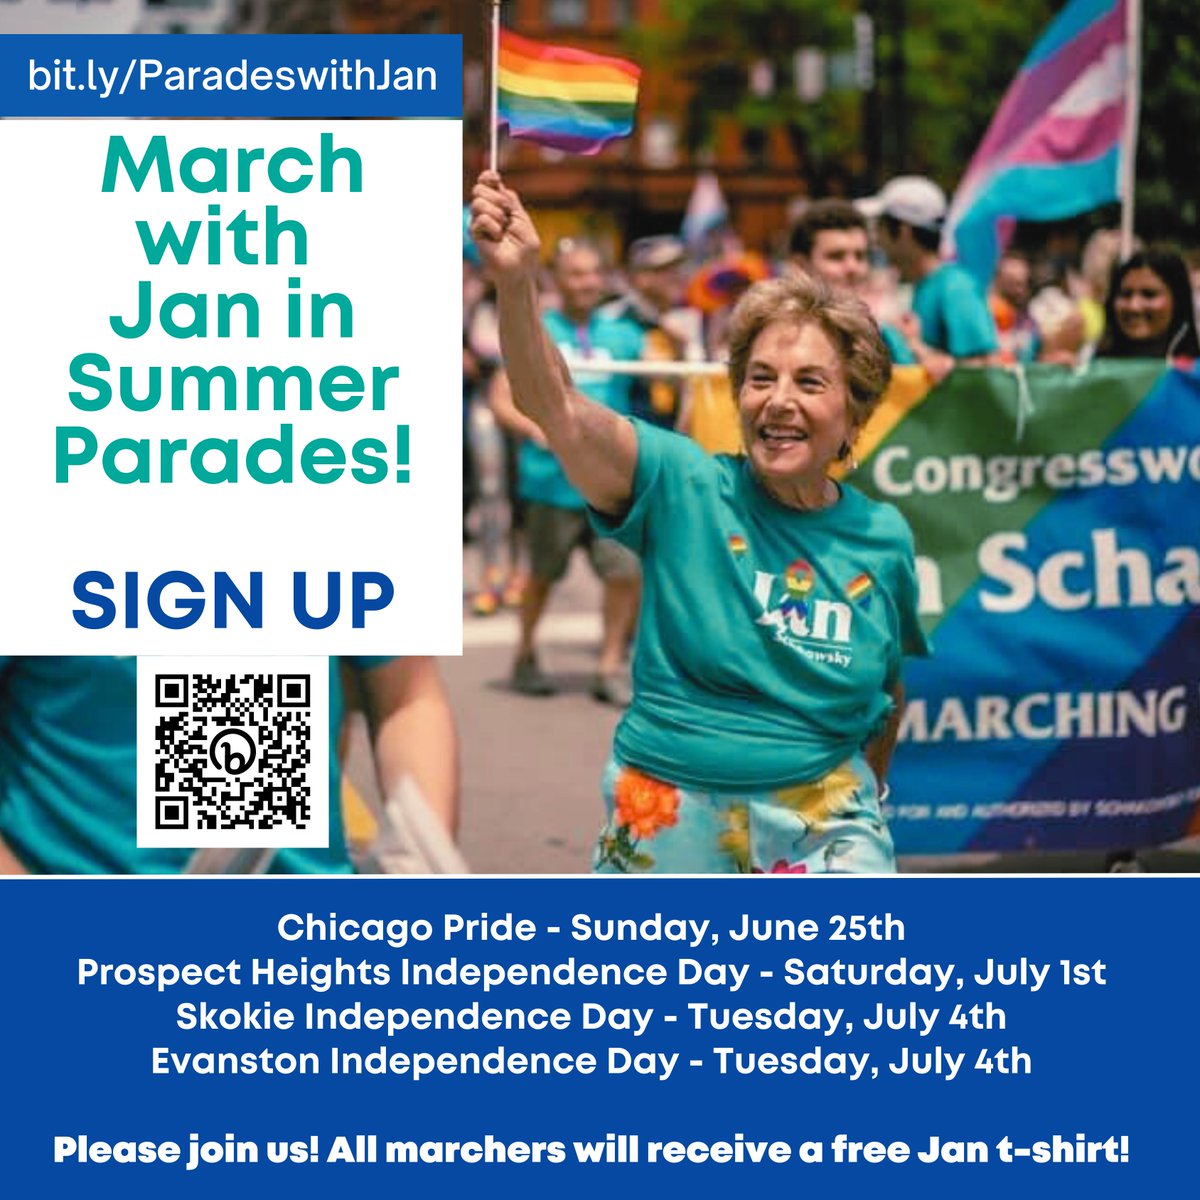 Are you ready to march with us this summer? SIGN UP: bit.ly/ParadeswithJan